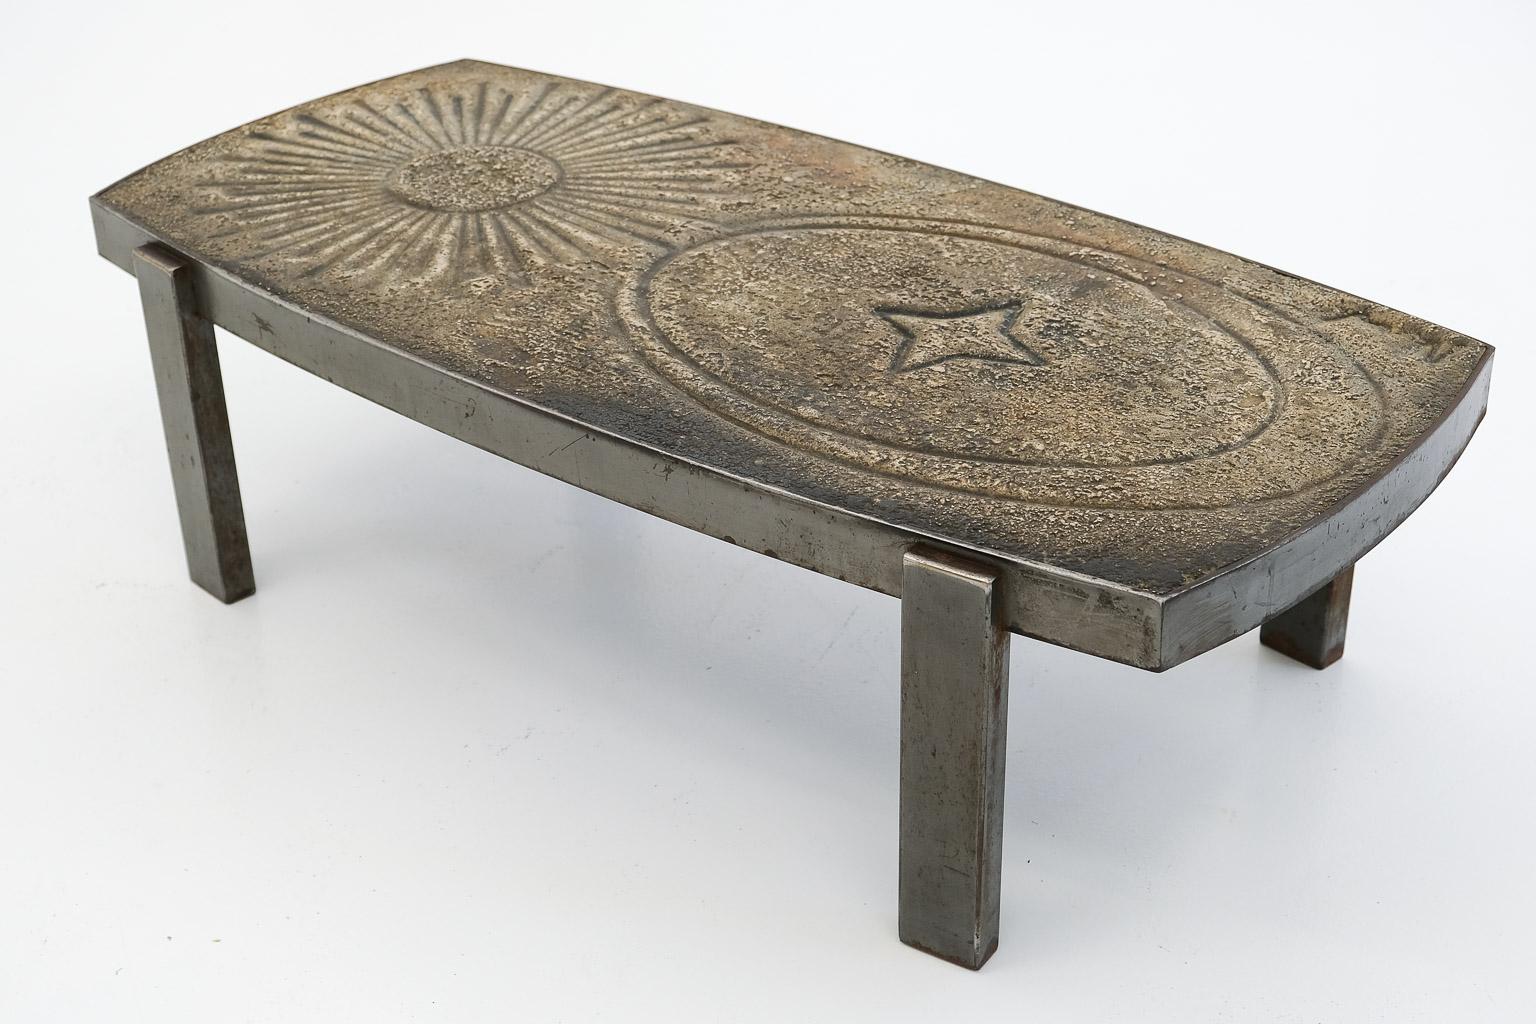 A heavy lava stone slab rests on an anthratzite-coloured steel frame. The lava slab shows a deeply embossed graphic form, a sun with several rays and a rhomb surrounded by ellipses. 

This table was designed and produced by the French ceramic artist